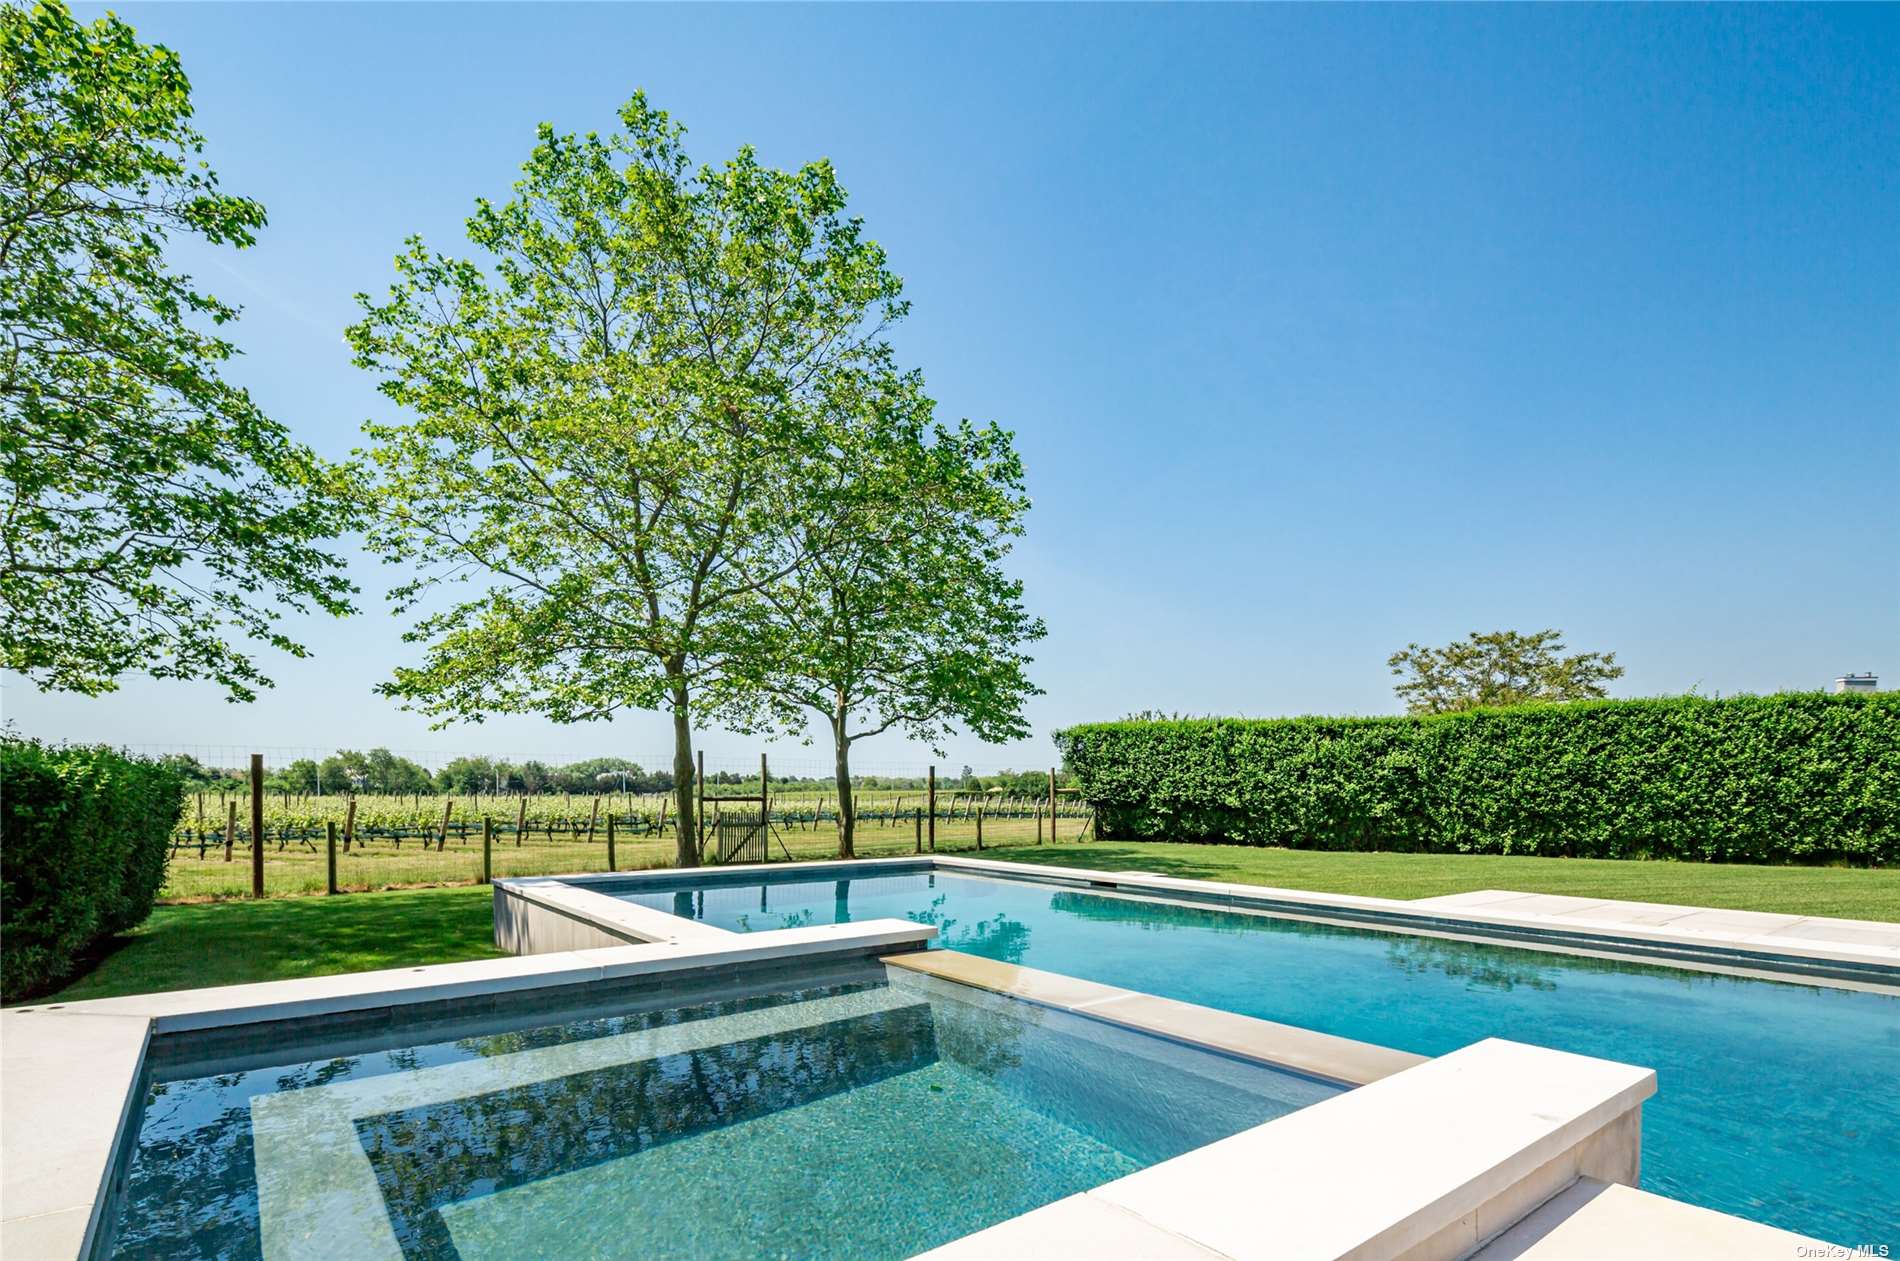 a view of a swimming pool with a garden and trees